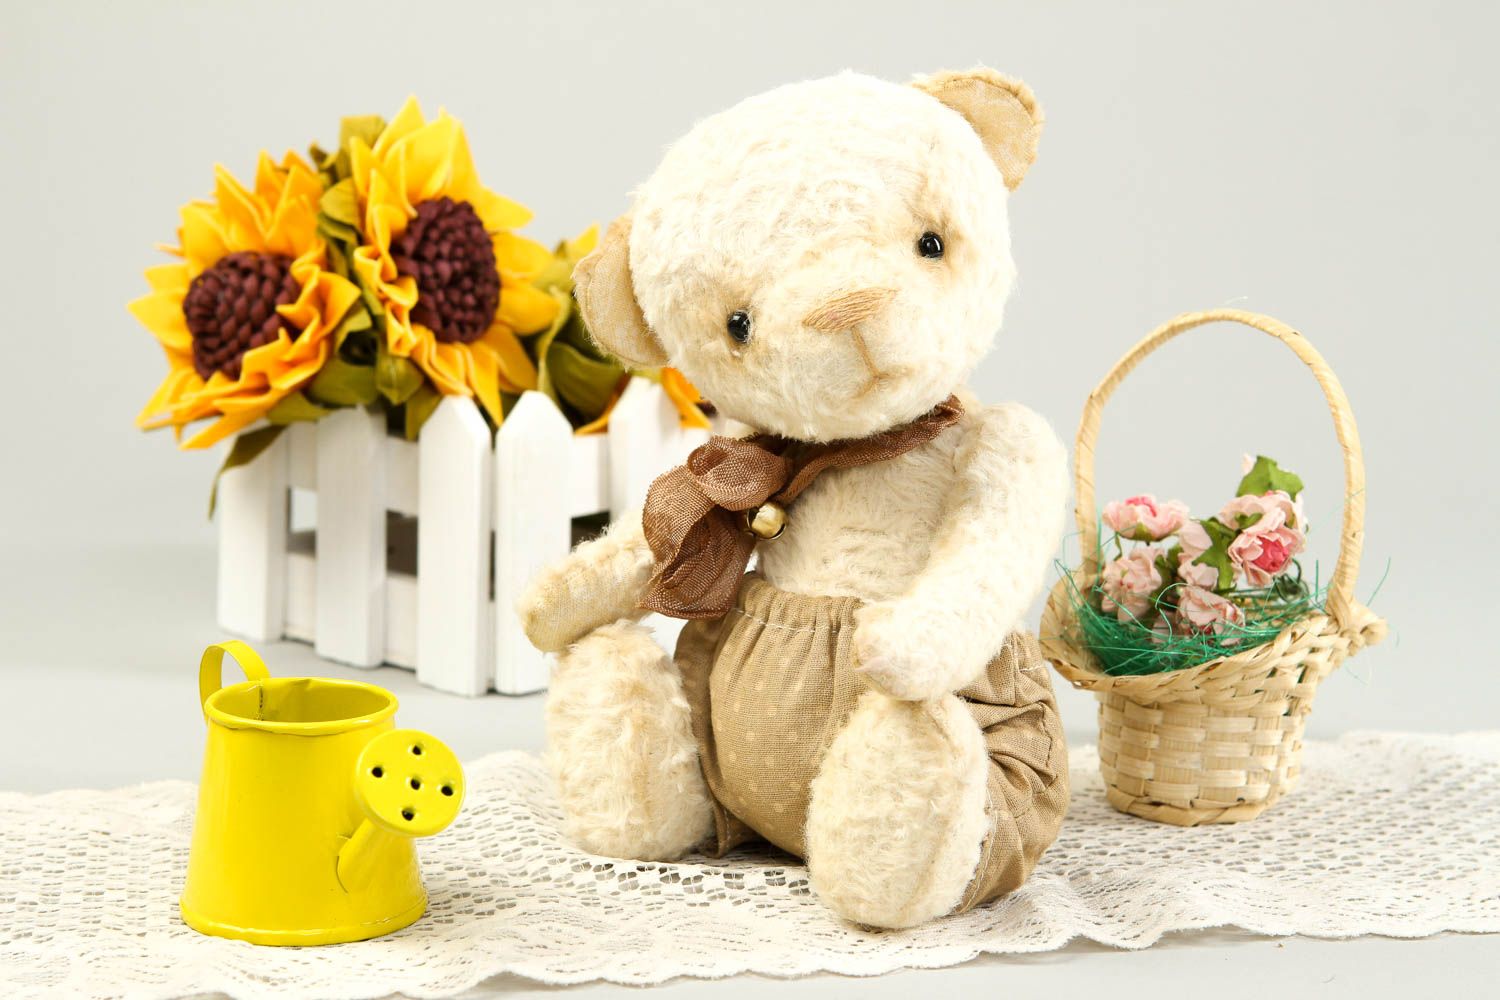 Handmade soft toy bear toy childrens toys nursery decor gifts for babies photo 1